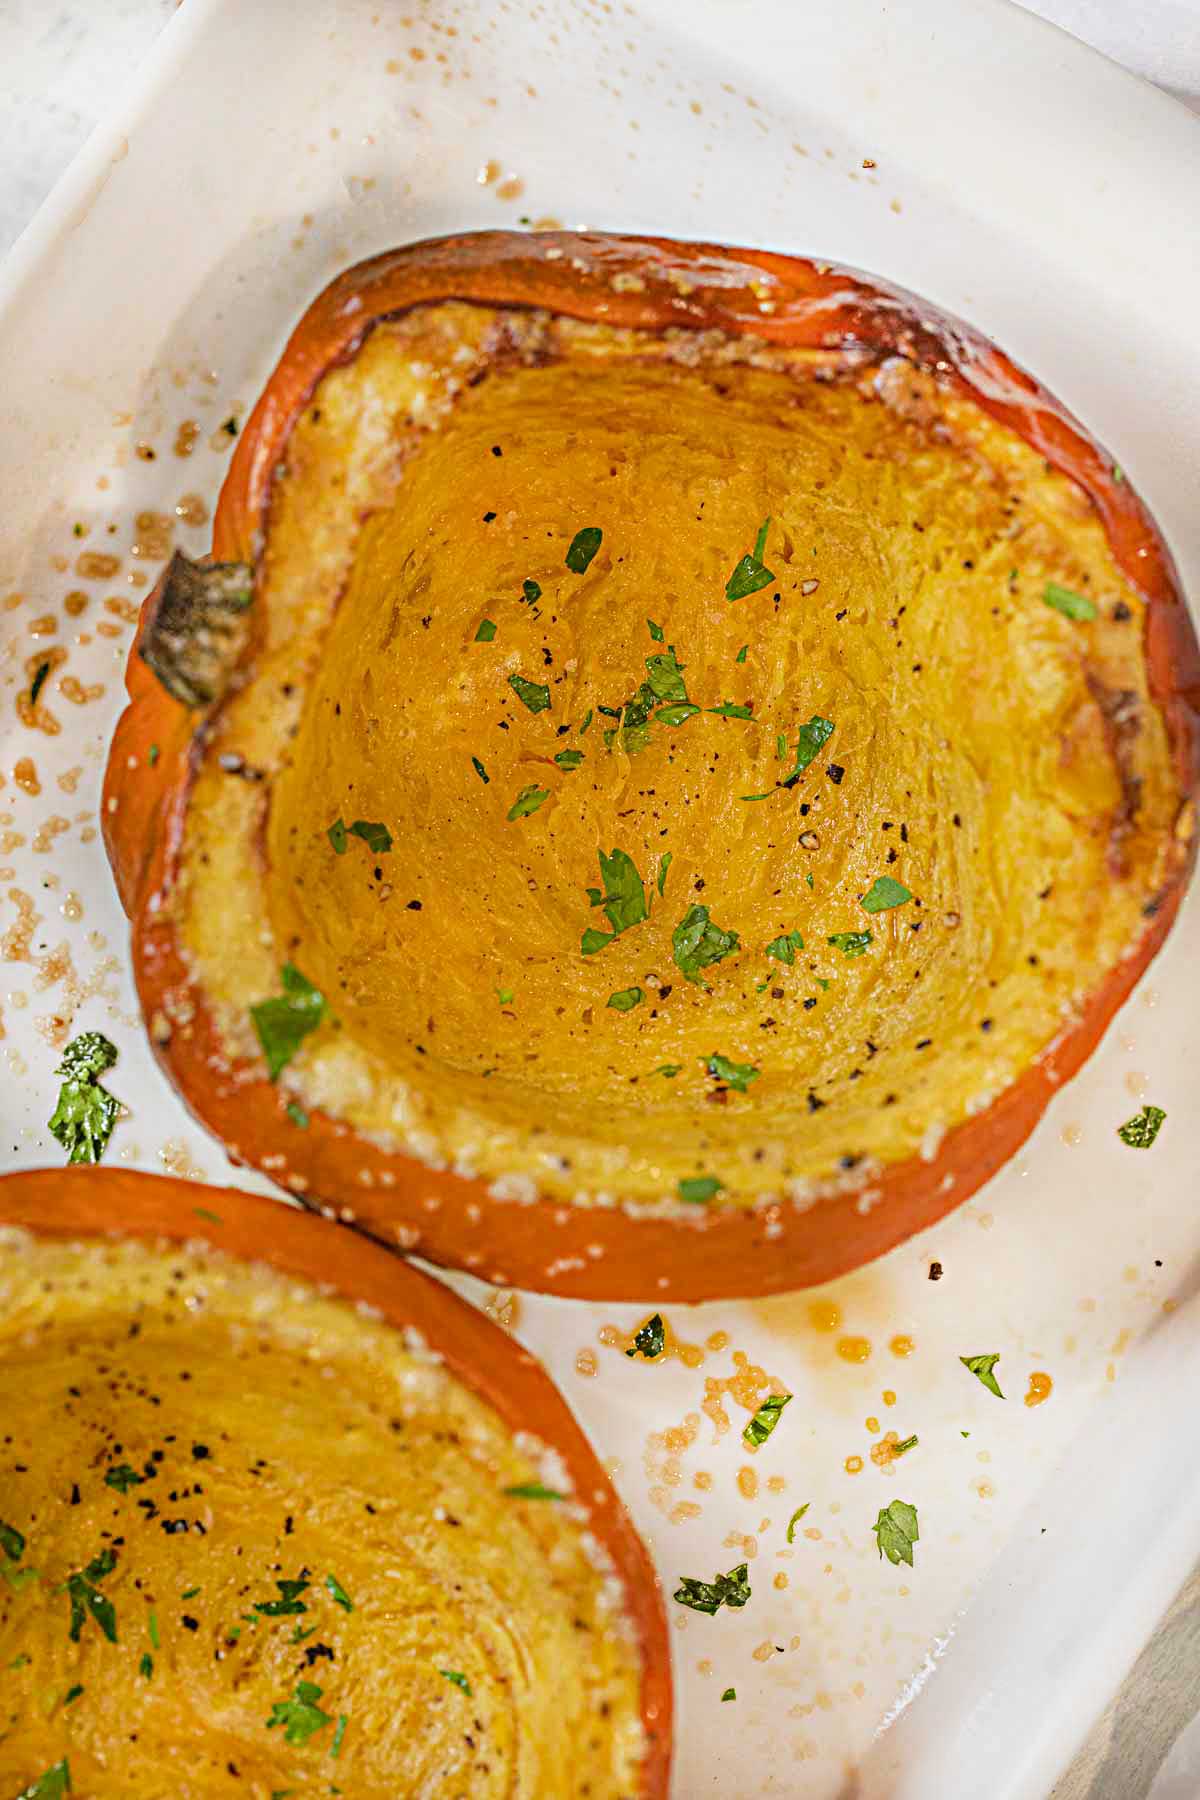 Easy Roasted Acorn Squash (3 Ingredients!) - Cooking Made Healthy